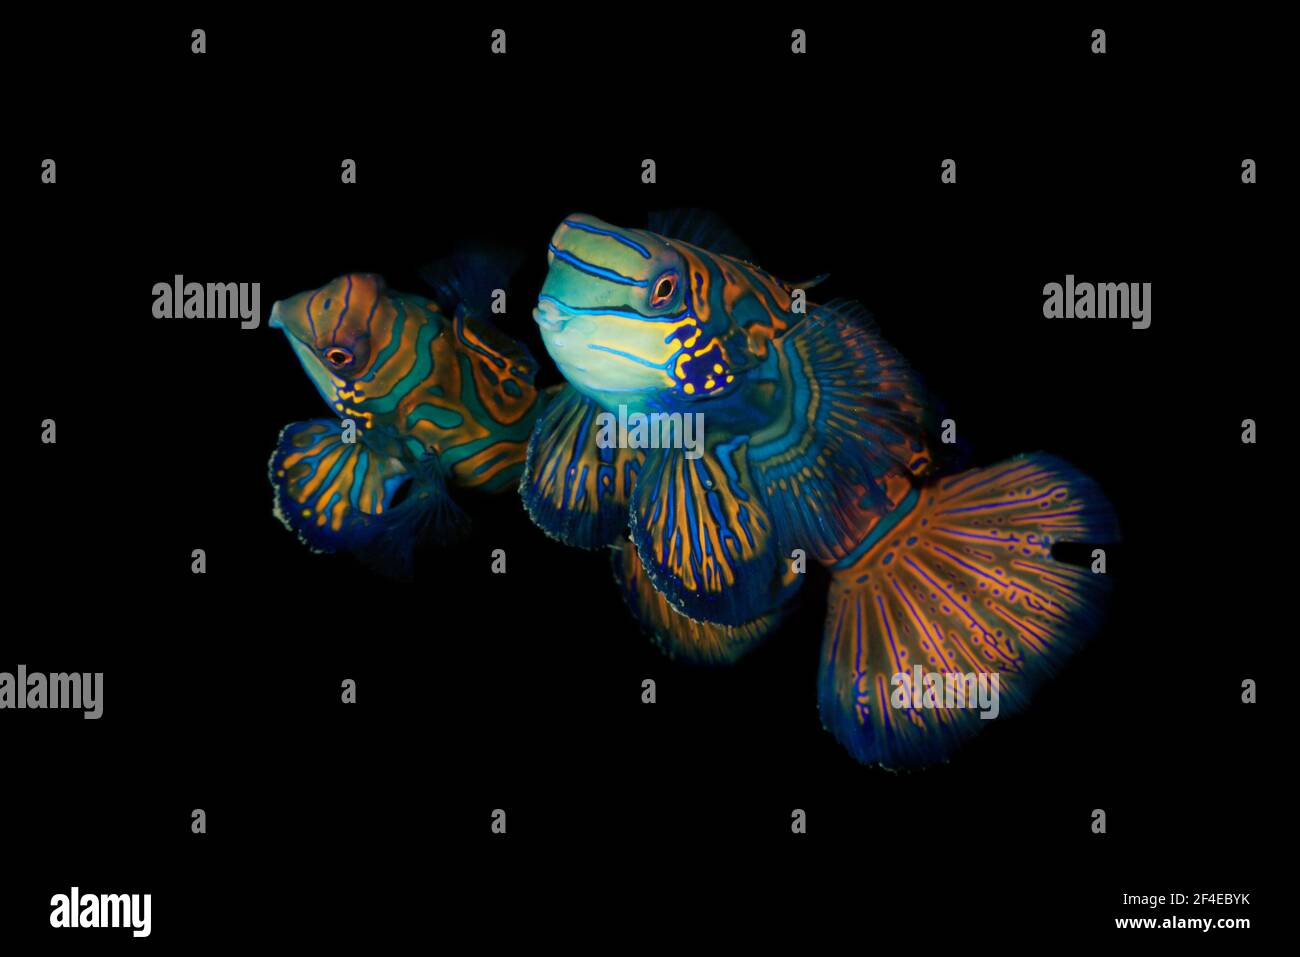 A couple of mandarinfish or mandarin dragonets (Synchiropus splendidus) coming out for mating at sunset at the reef of the Lembeh Strait. Stock Photo